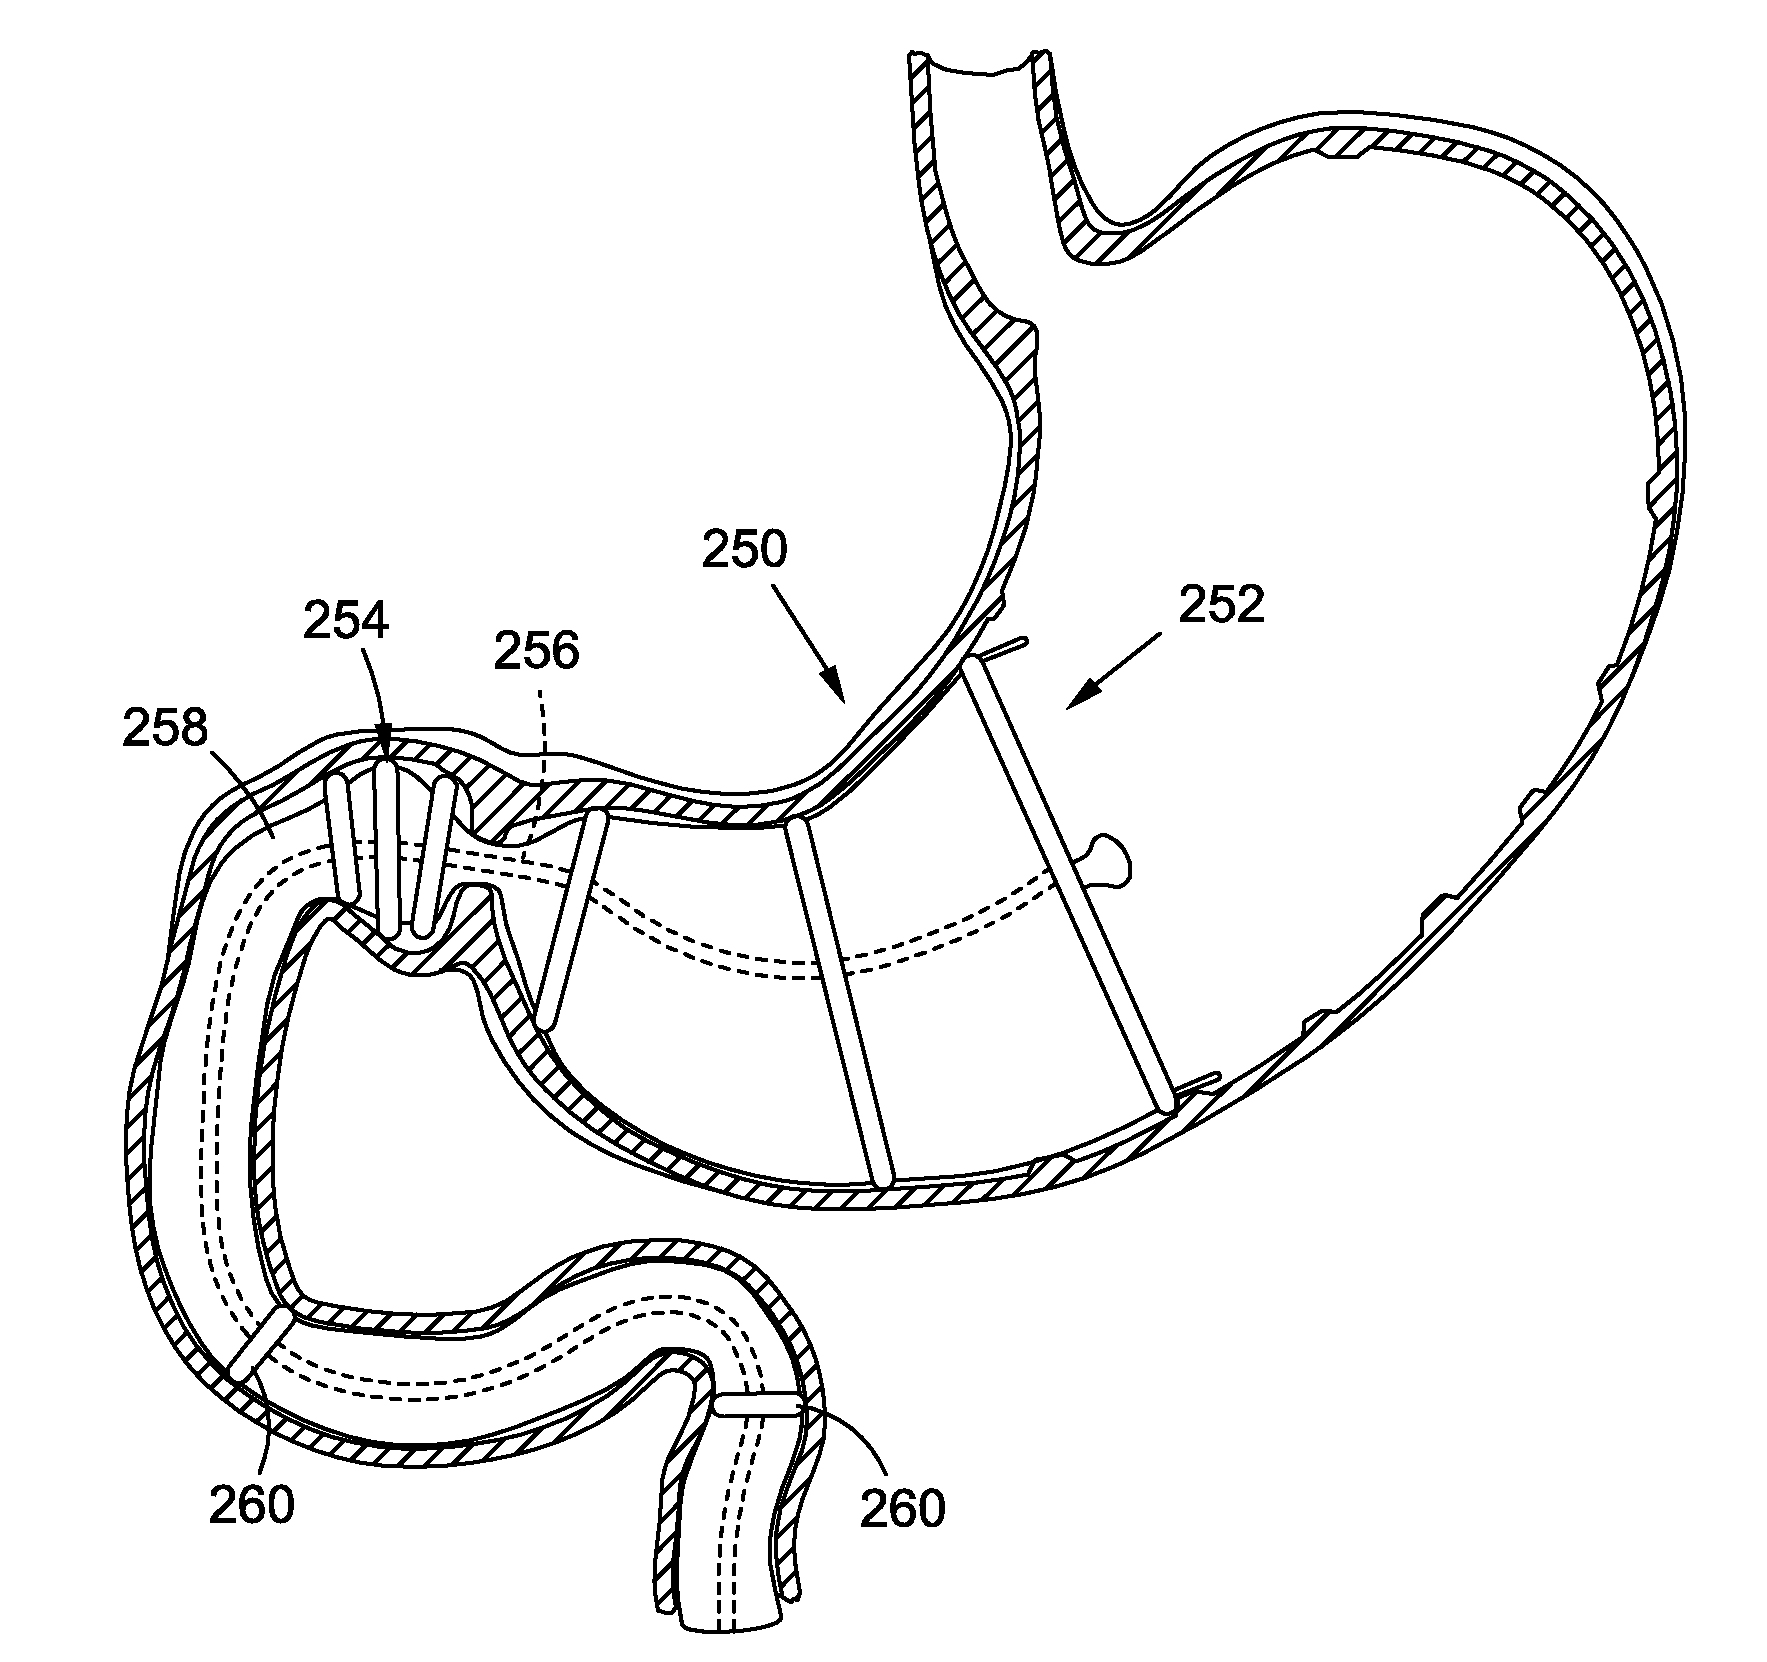 Anchored non-piercing duodenal sleeve and delivery systems